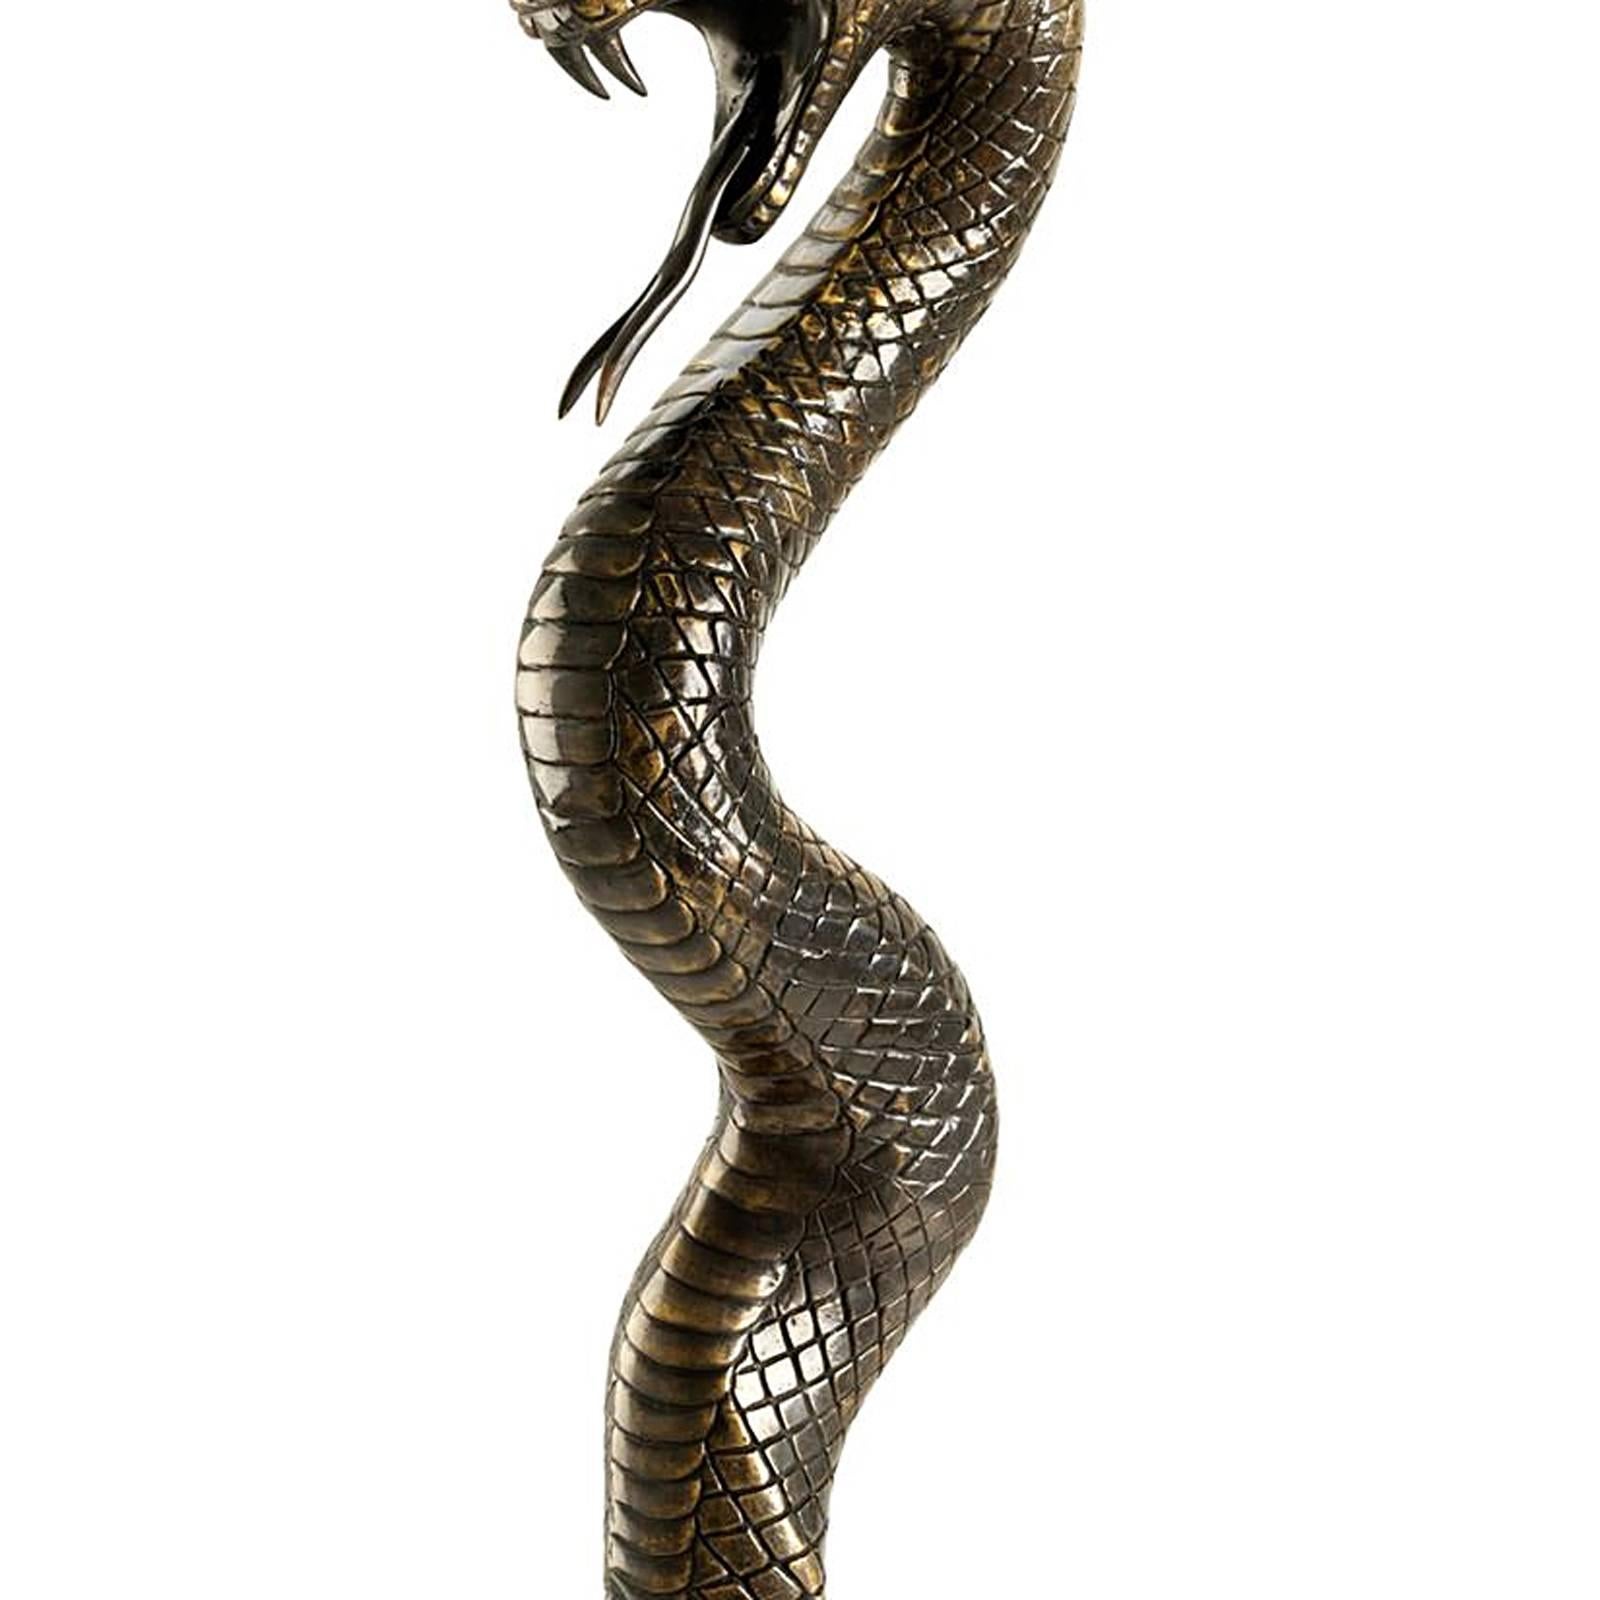 Contemporary Snake Sculpture in Solid Bronze